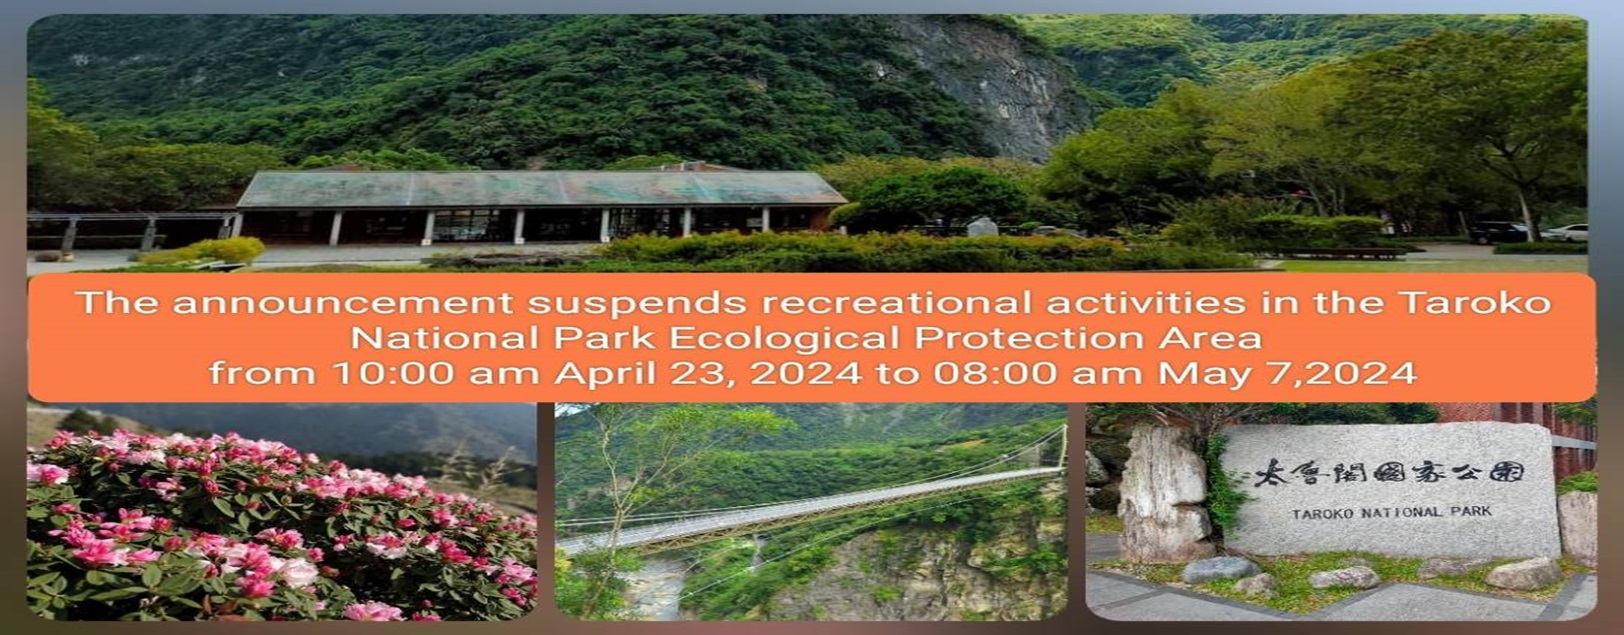 The announcement suspends recreational activities in the Taroko National Park Ecological Protection Area from 10:00 am April 23, 2024.